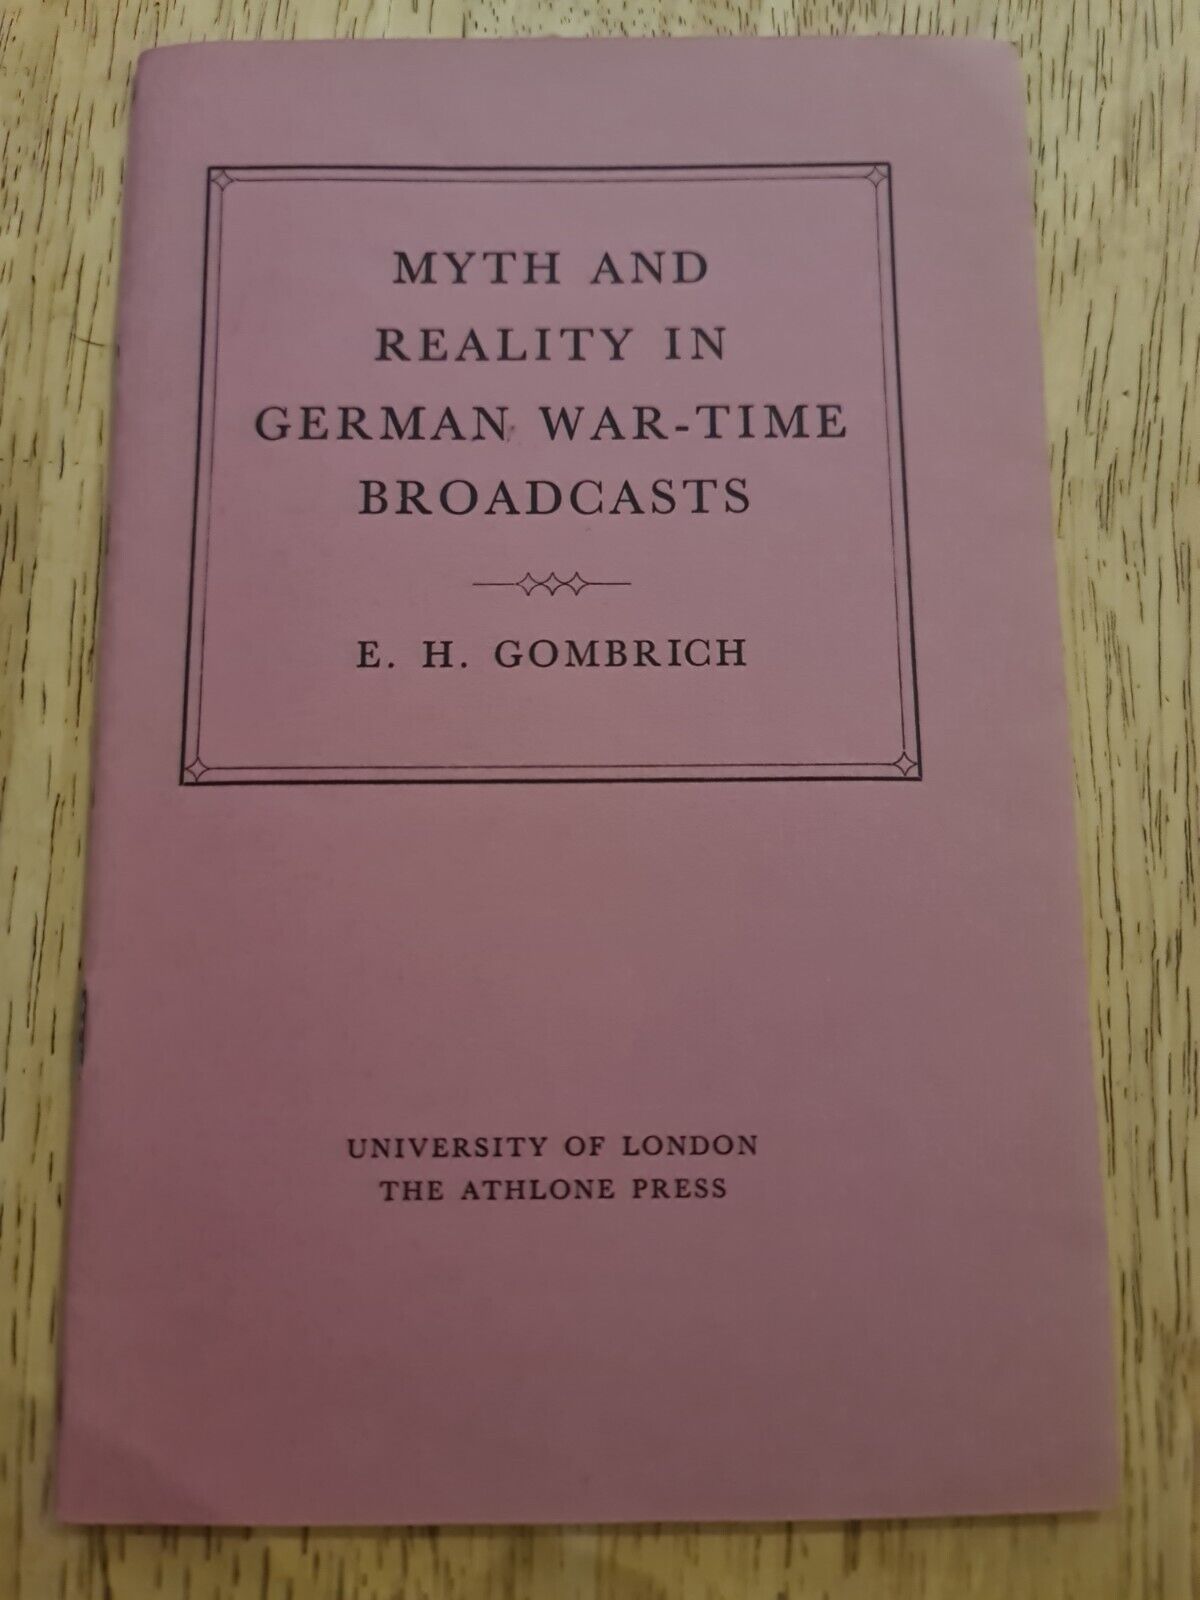 Myth and Reality in German War-Time Broadcasts by E H Gombrich